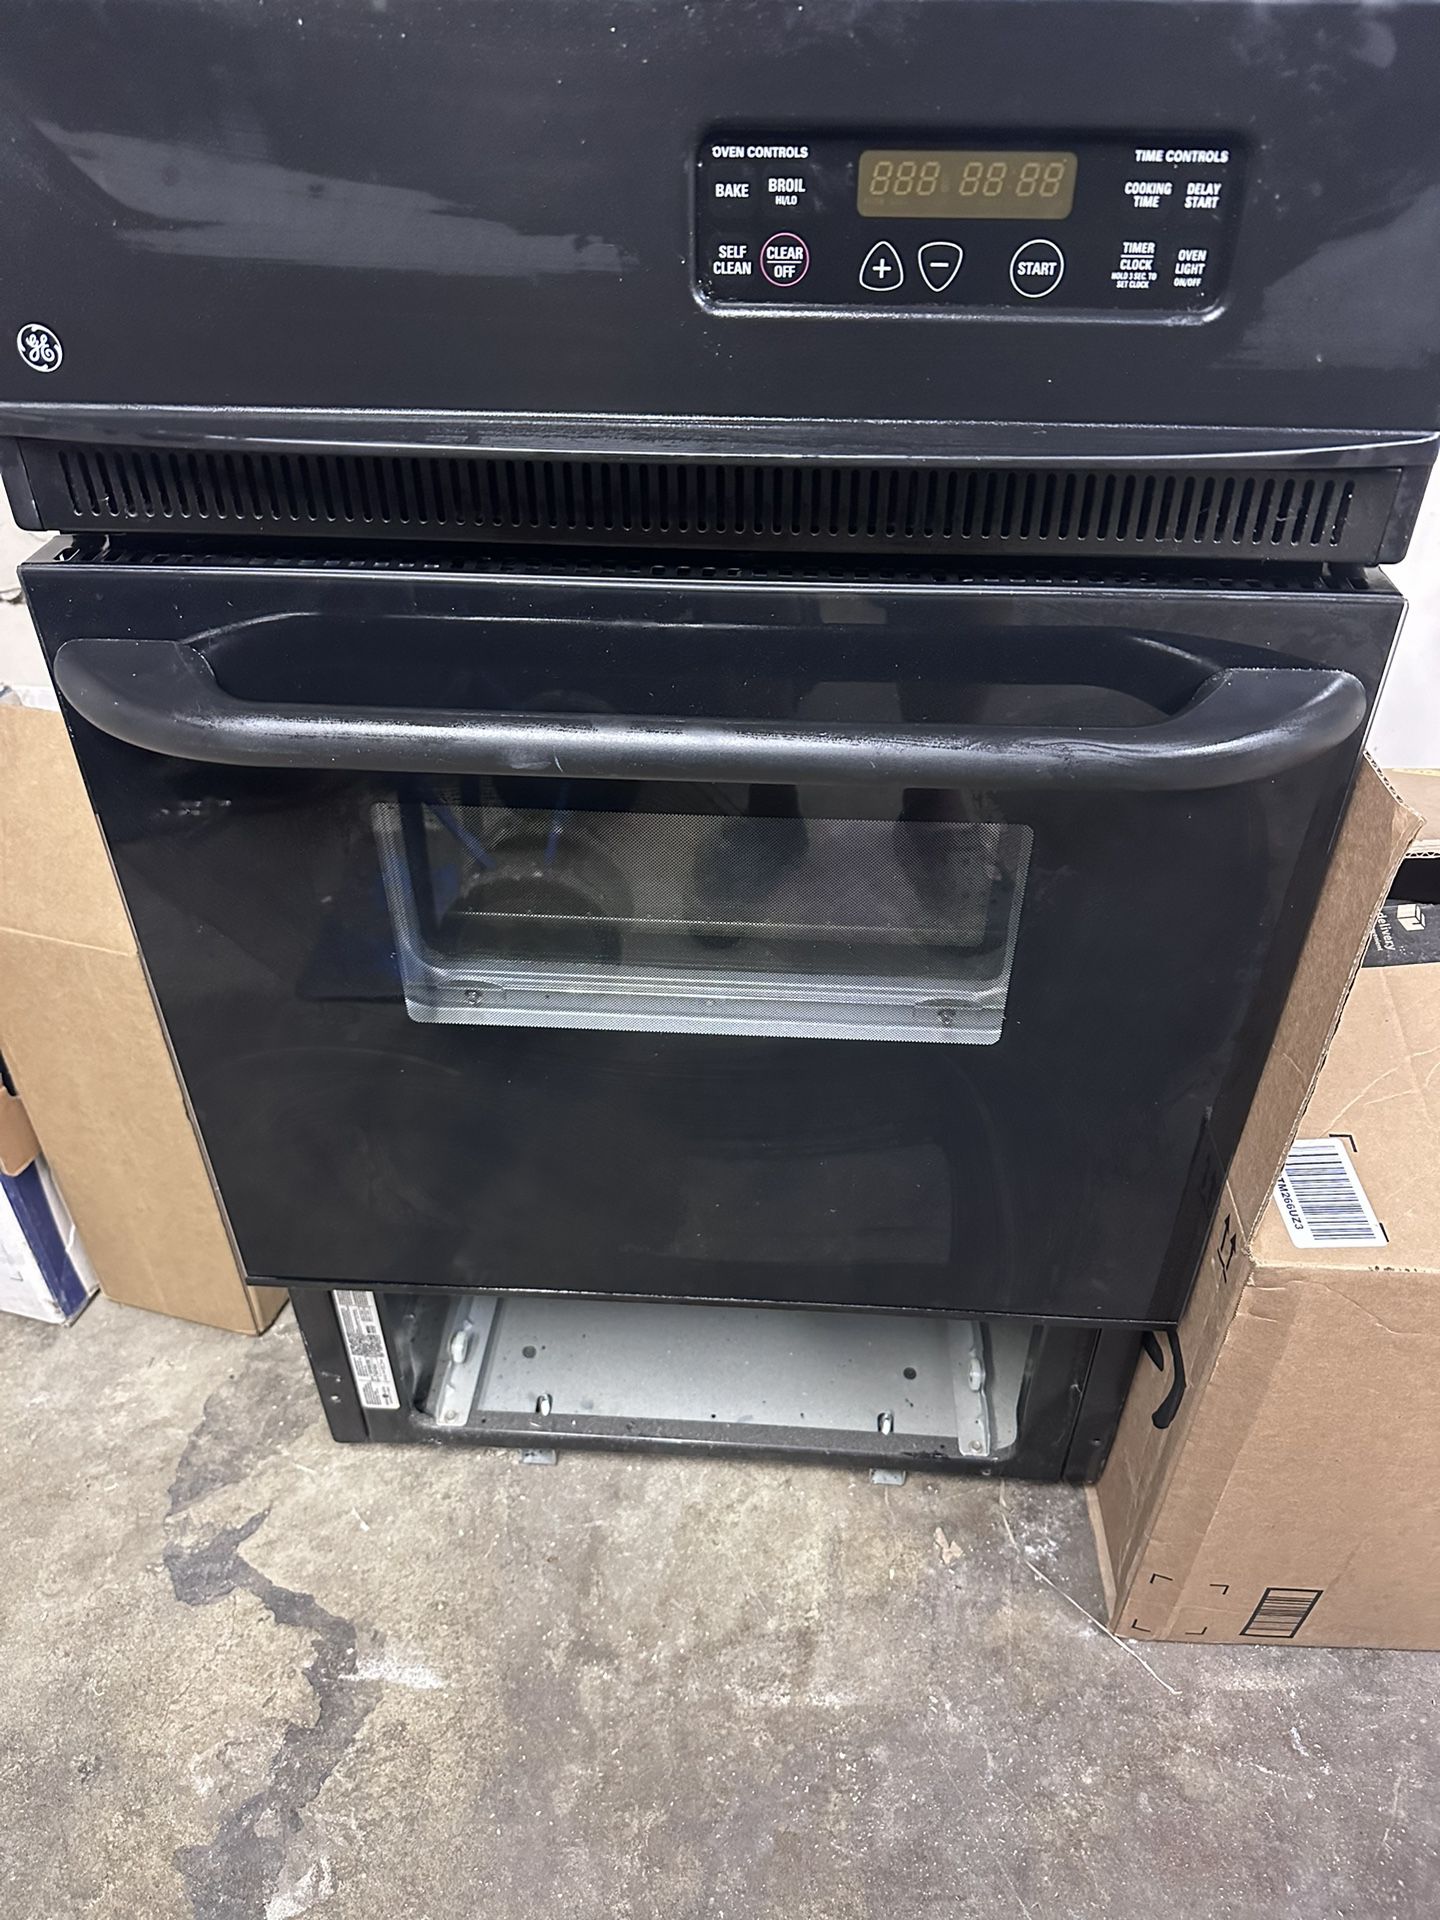 GE Electric Oven